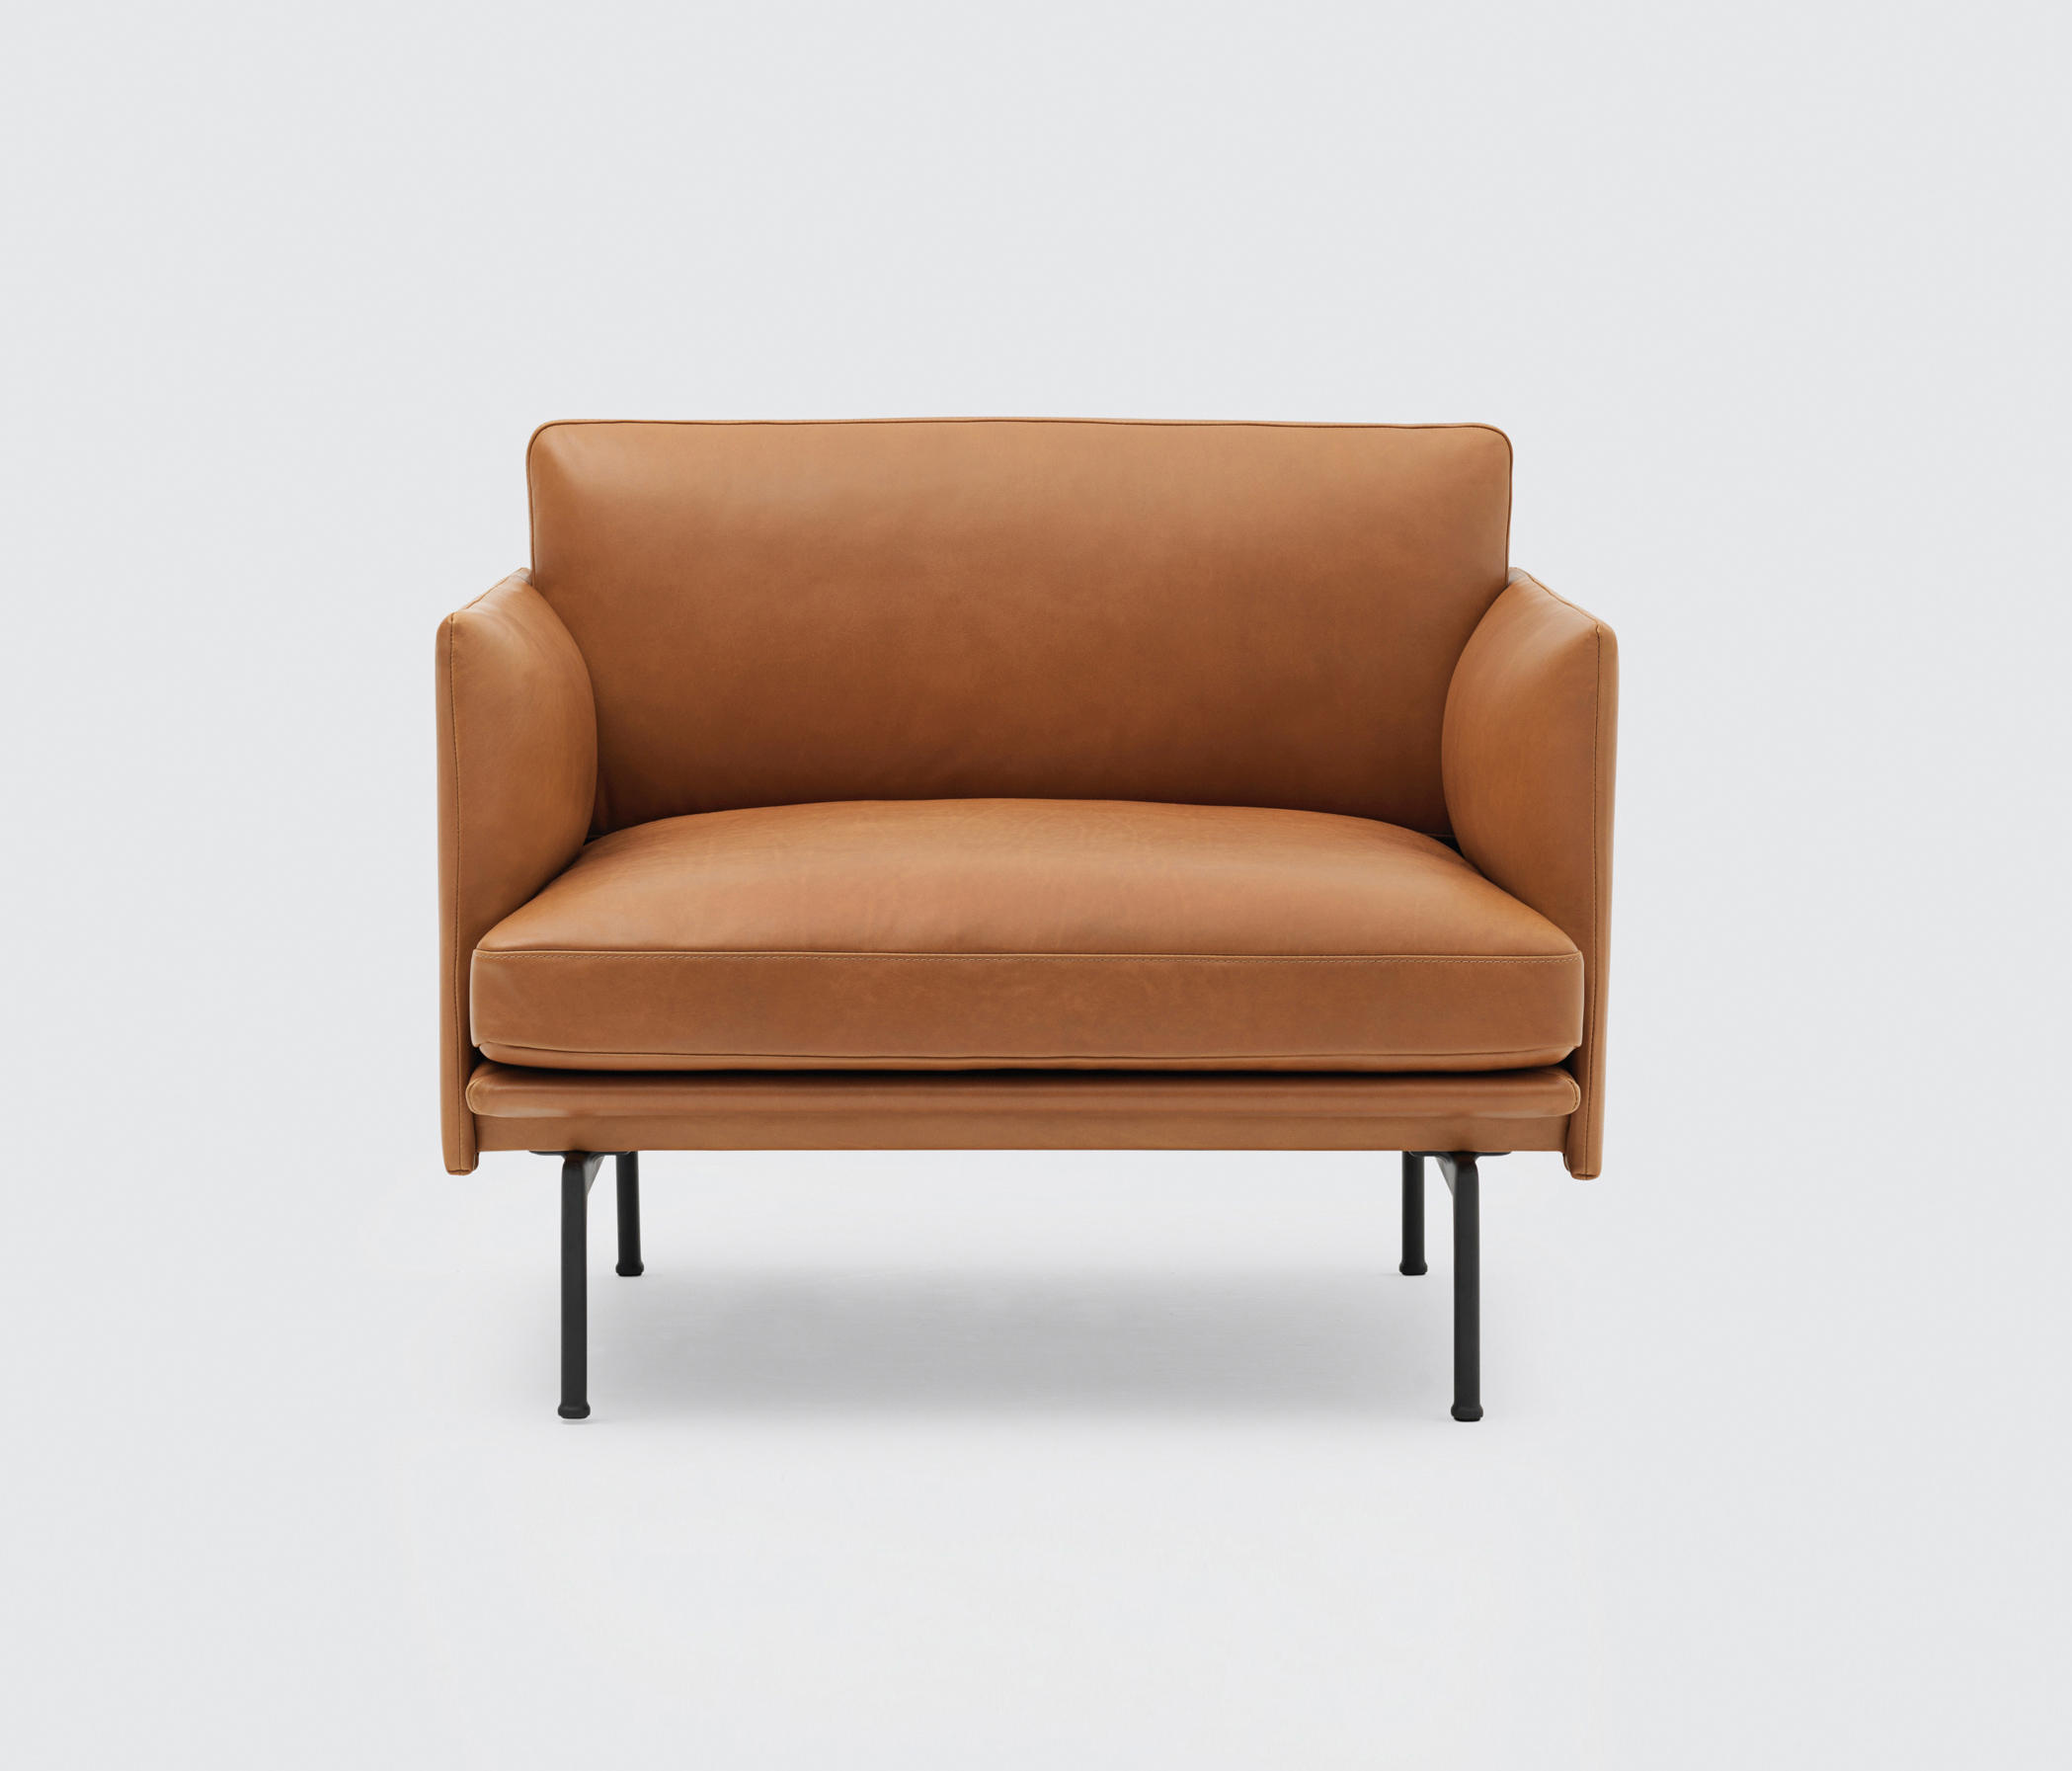 Outline Chair by Anderssen & Voll for Muuto